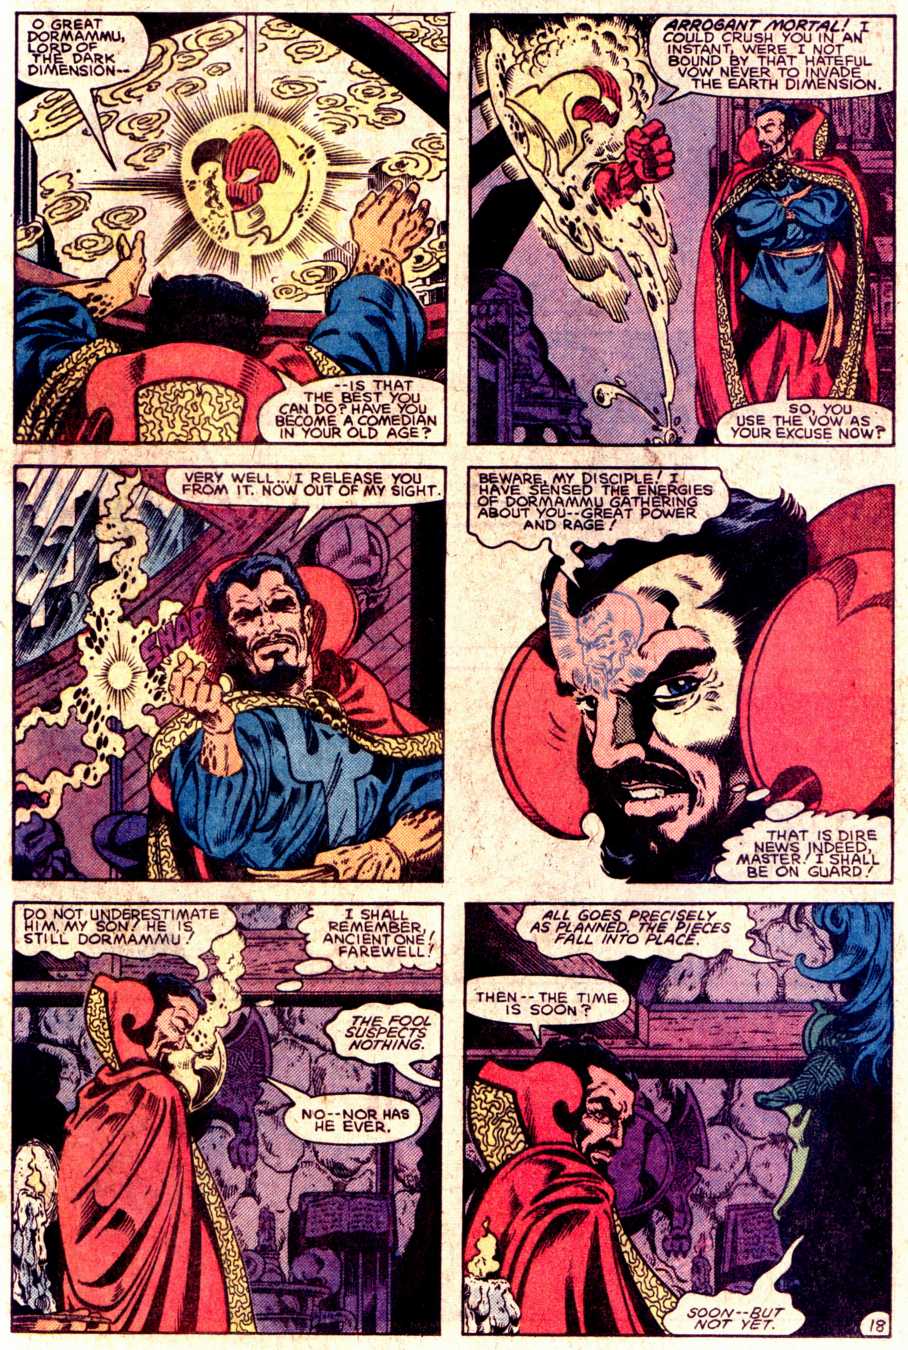 What If? (1977) issue 40 - Dr Strange had not become master of The mystic arts - Page 19